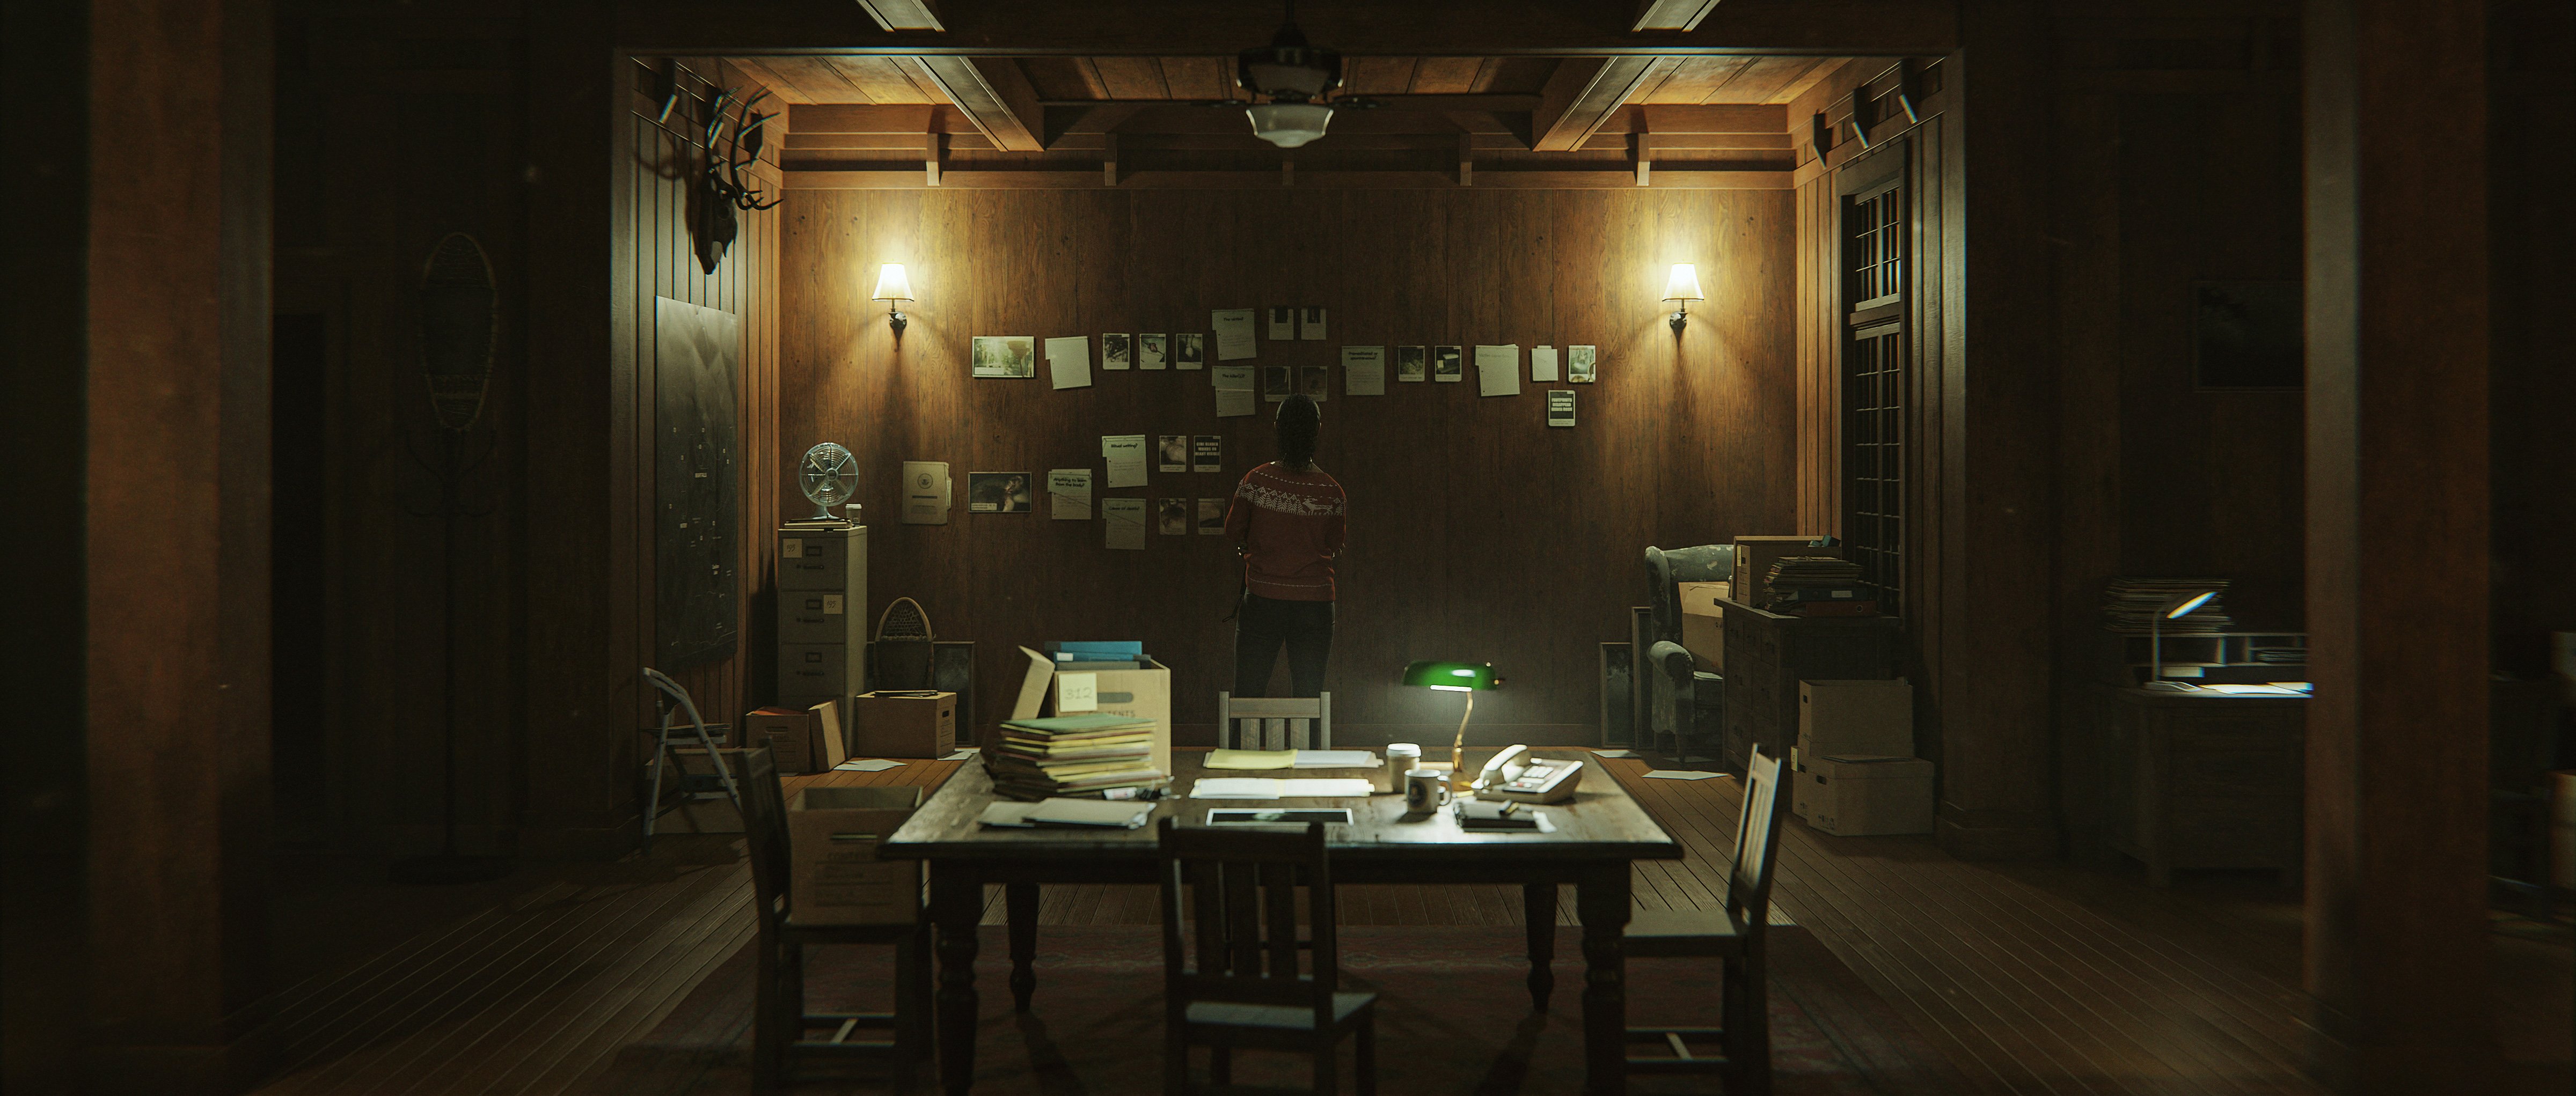 Alan Wake 2 is a stunning example of what the future of PC gaming